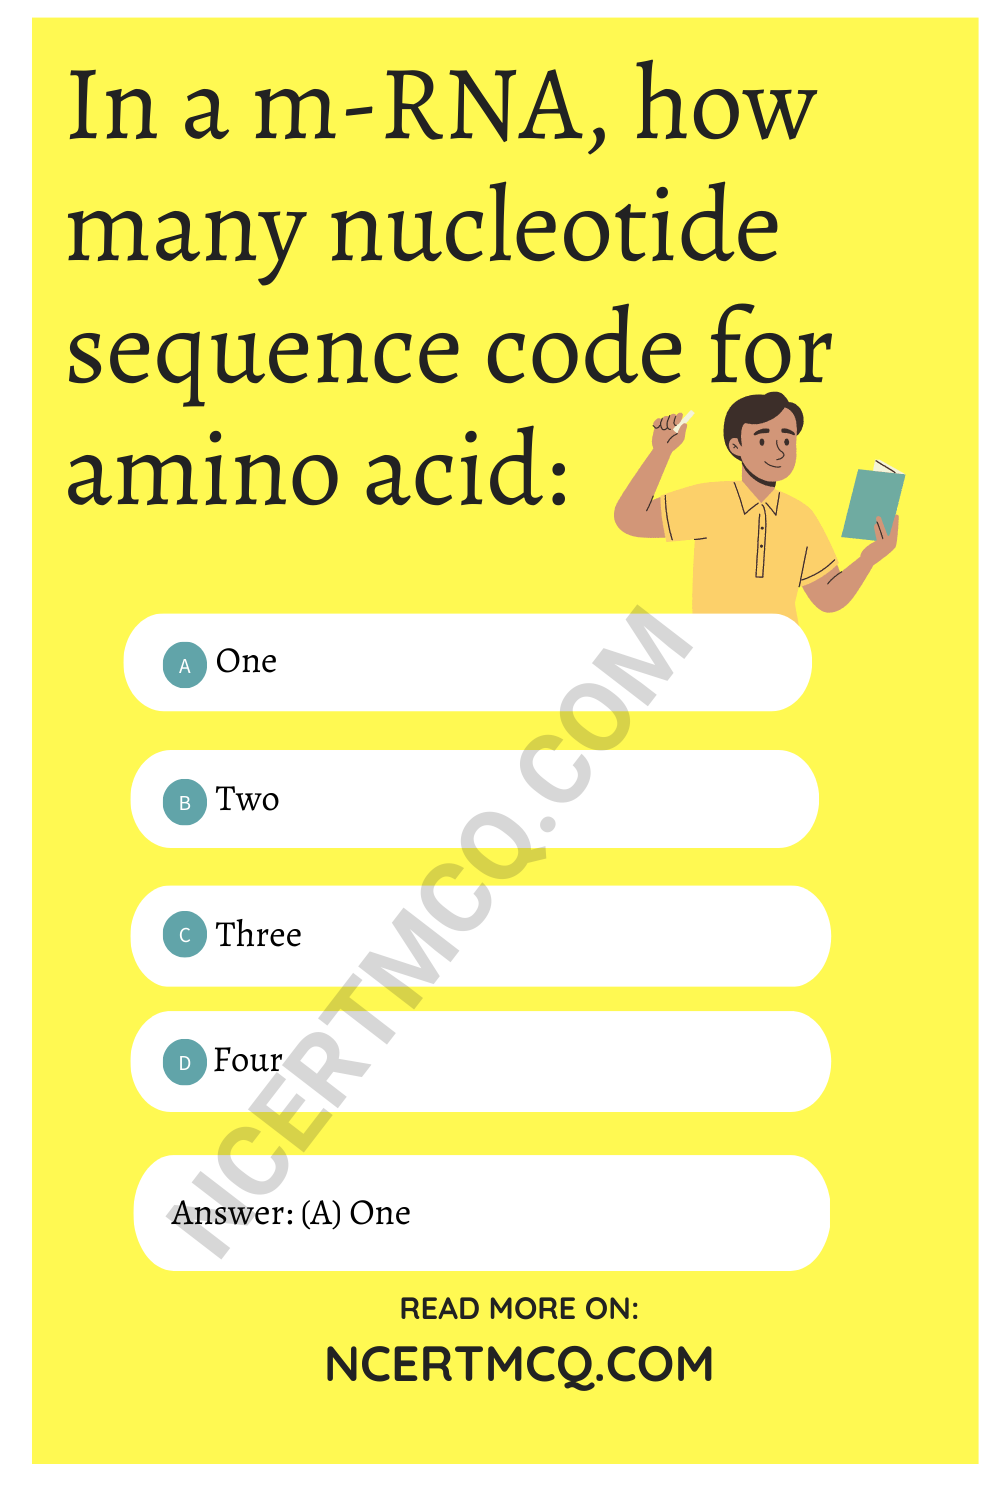 In a m-RNA, how many nucleotide sequence code for amino acid: